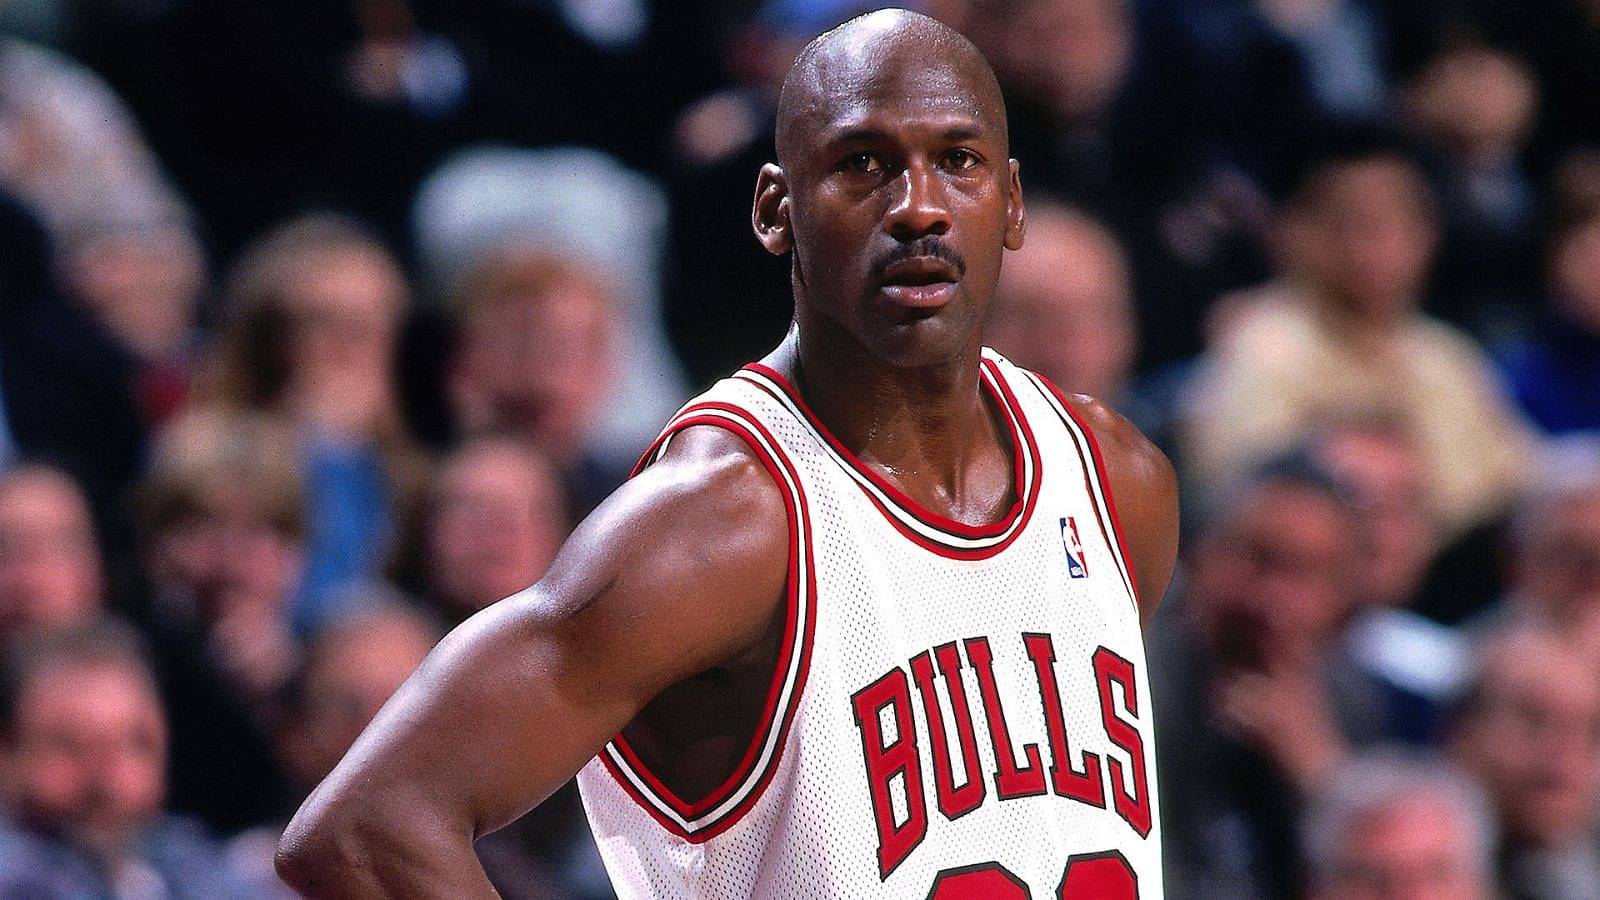 Cover Image for Michael Jordan’s Chicago Bulls never lost 3 games in a row from 1990 to 1998, proving his dominance greater than Shaquille O’Neal and Wilt Chamberlain